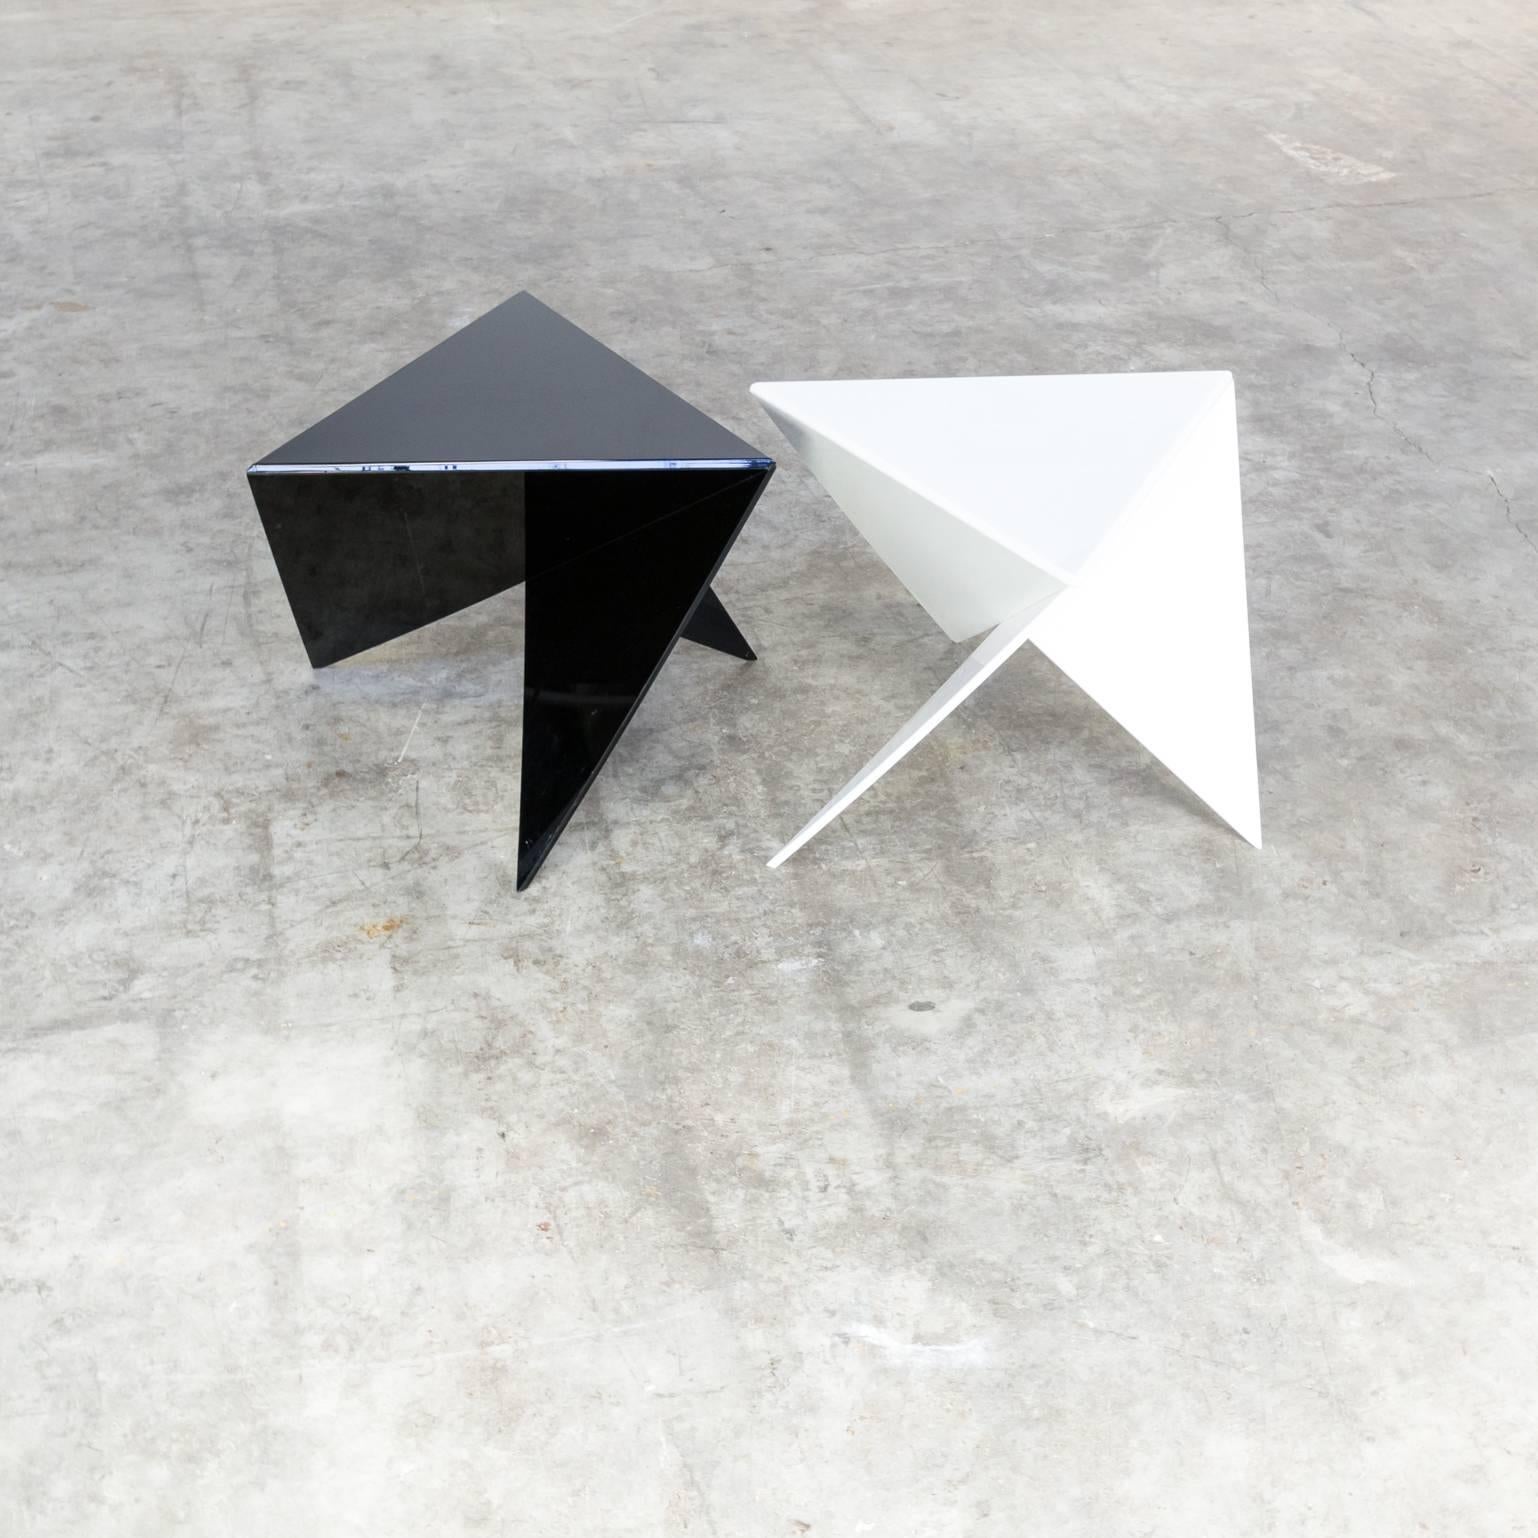 1980s Ronald Willemsen Coffee Table Metaform, Set of Two For Sale 4